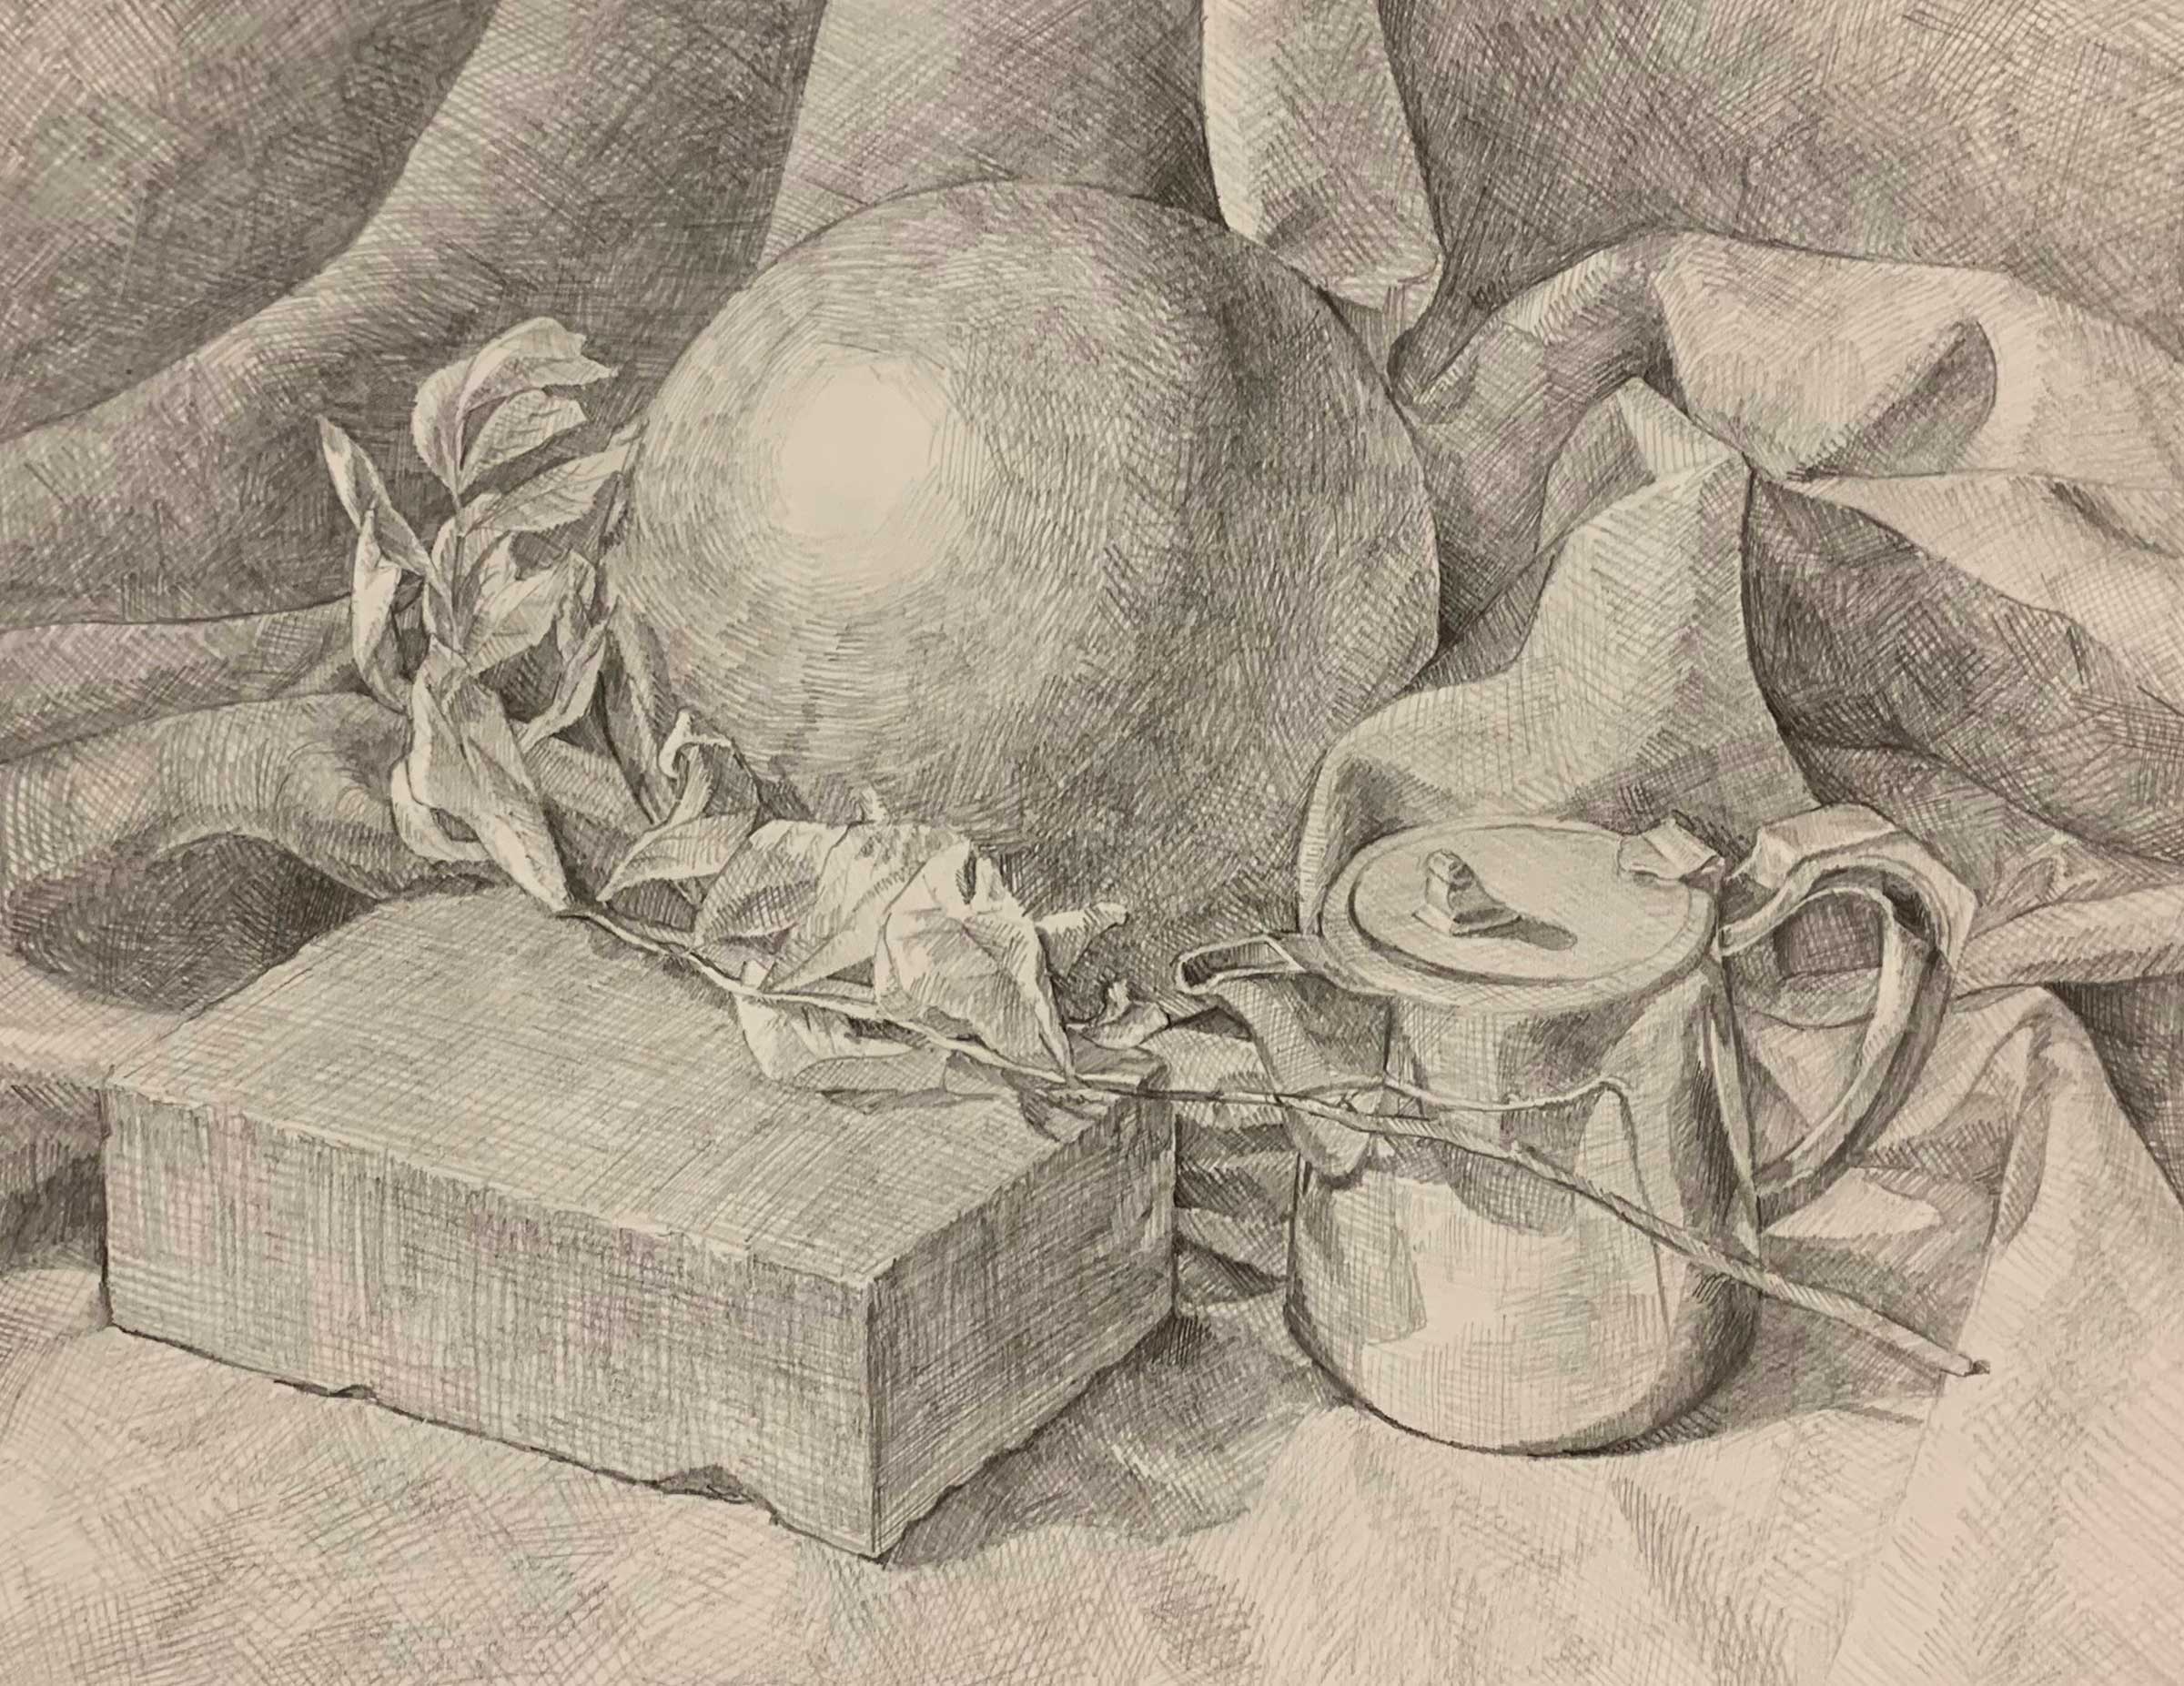 A drawing of a flower, teapot, brick, and ball arranged on a cloth.